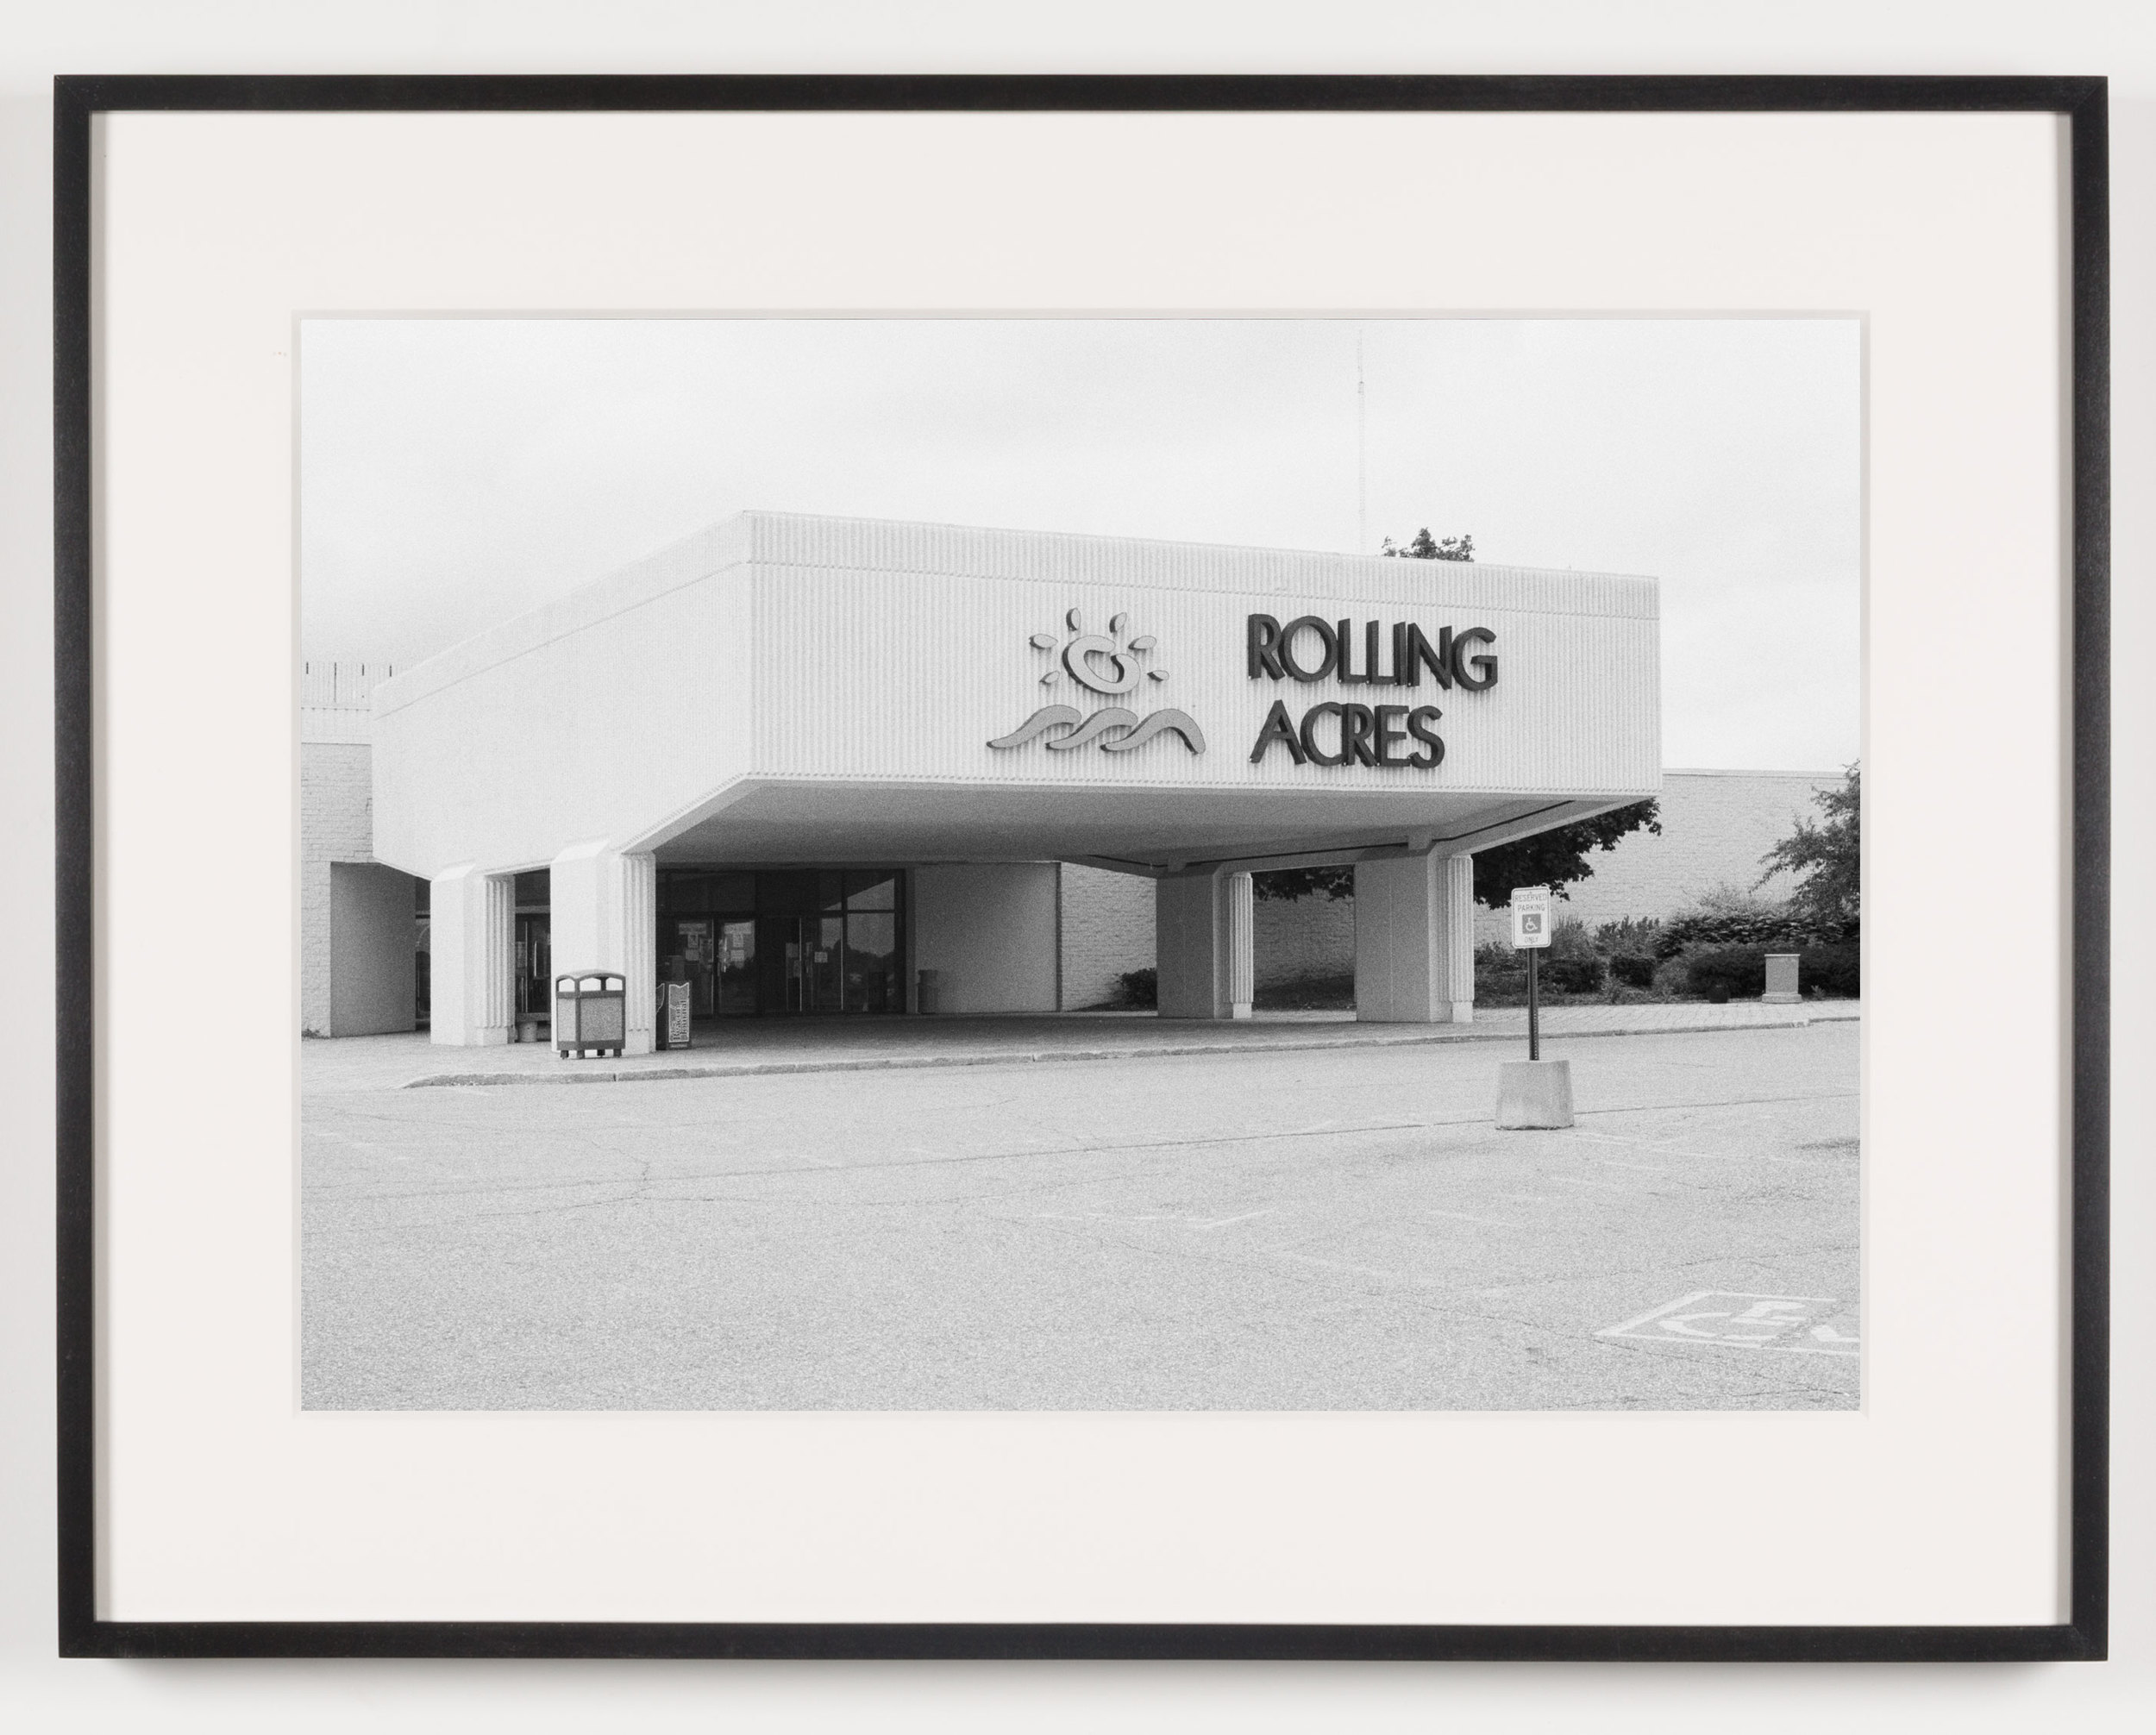   Rolling Acres Mall (View of Main Entrance) Akron, OH, Est. 1975    2011   Epson Ultrachrome K3 archival ink jet print on Hahnemühle Photo Rag paper  21 5/8 x 28 1/8 inches   American Passages, 2001–2011     